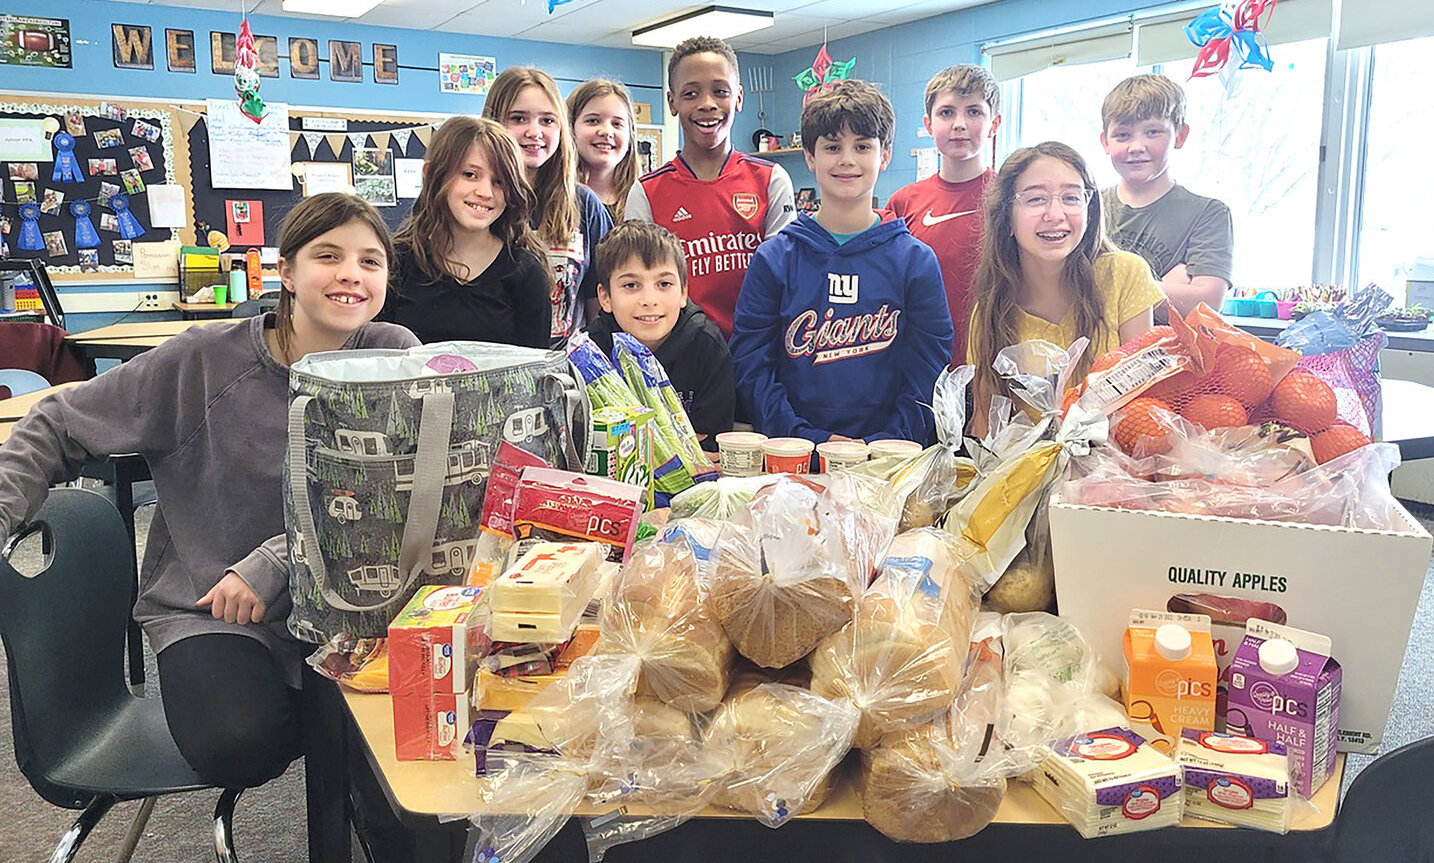 Hamilton Central School Project-Based Learning students recently organized a High Needs Food Drive for the local food cupboard.